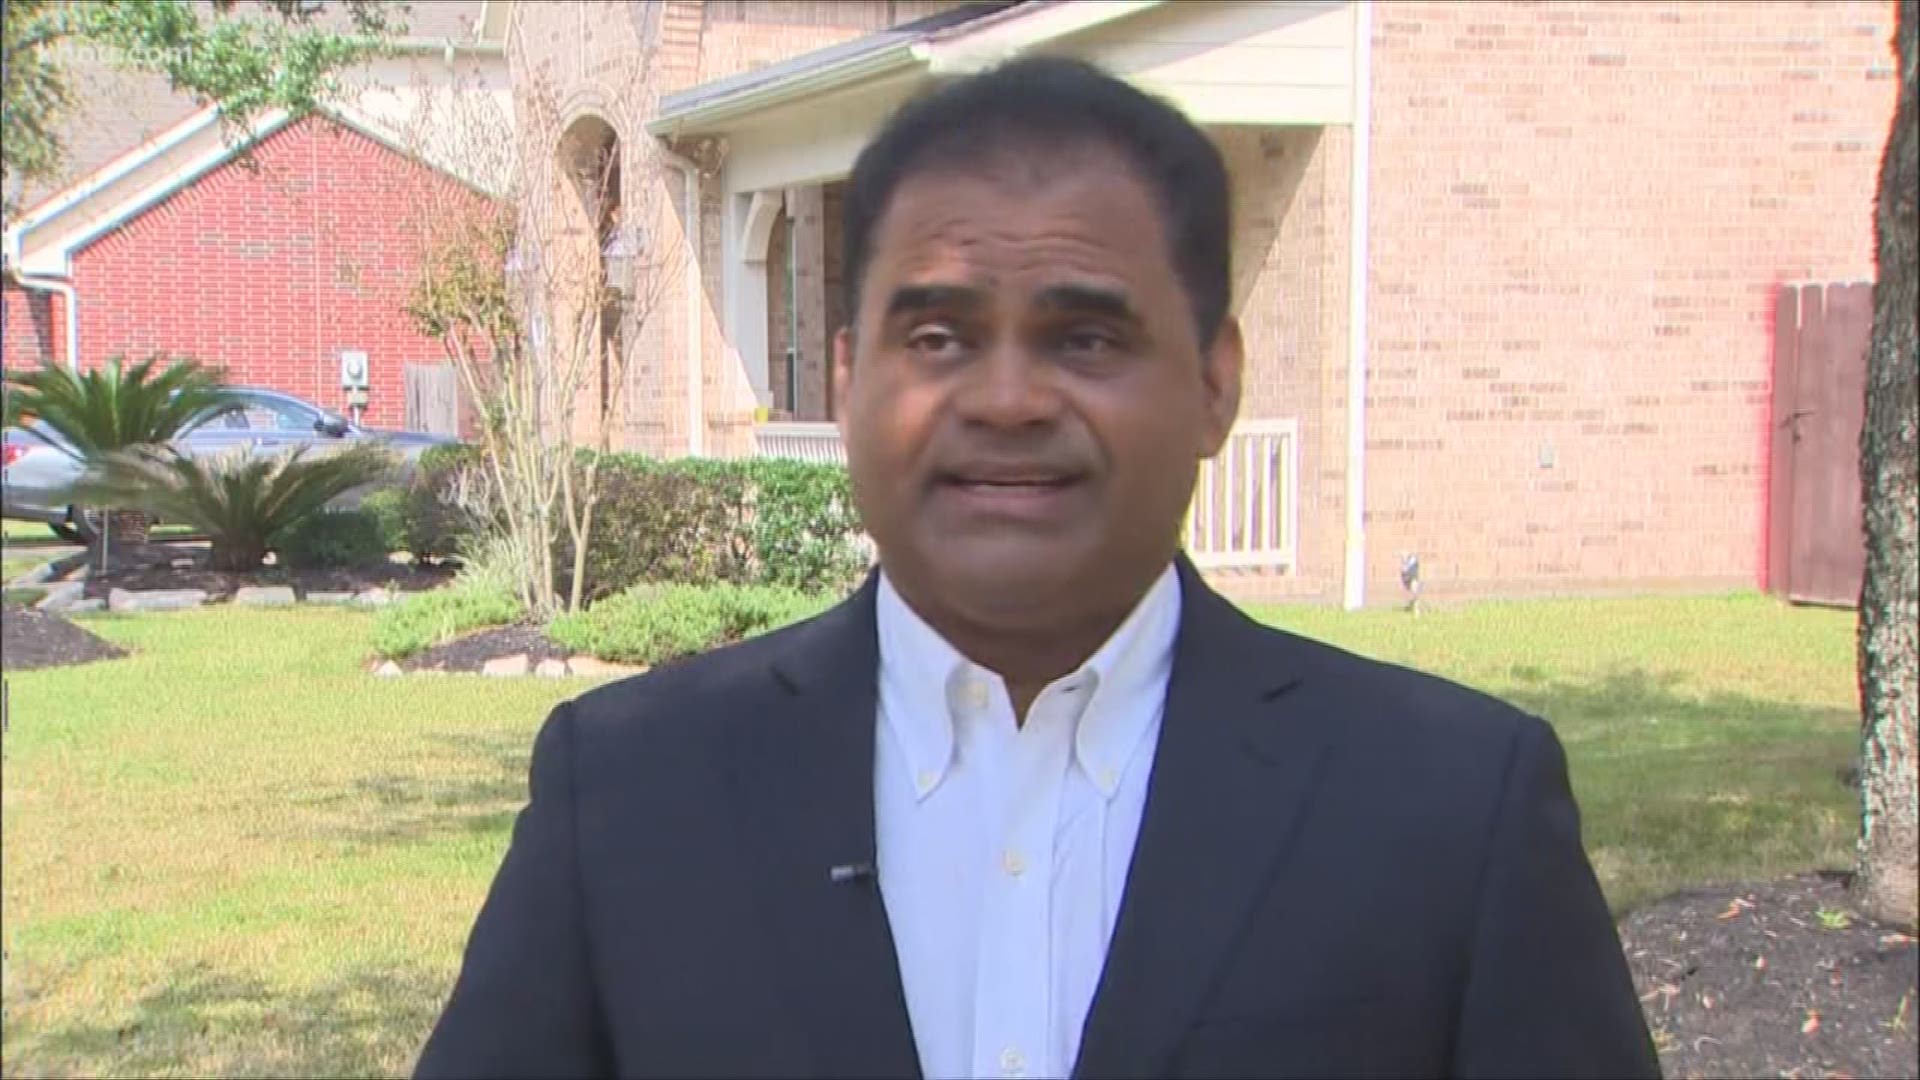 KP George became the first county judge-elect in Texas of South Asian descent. He unseated a longtime Republican in what many call a "blue wave," but George credits personal politics.